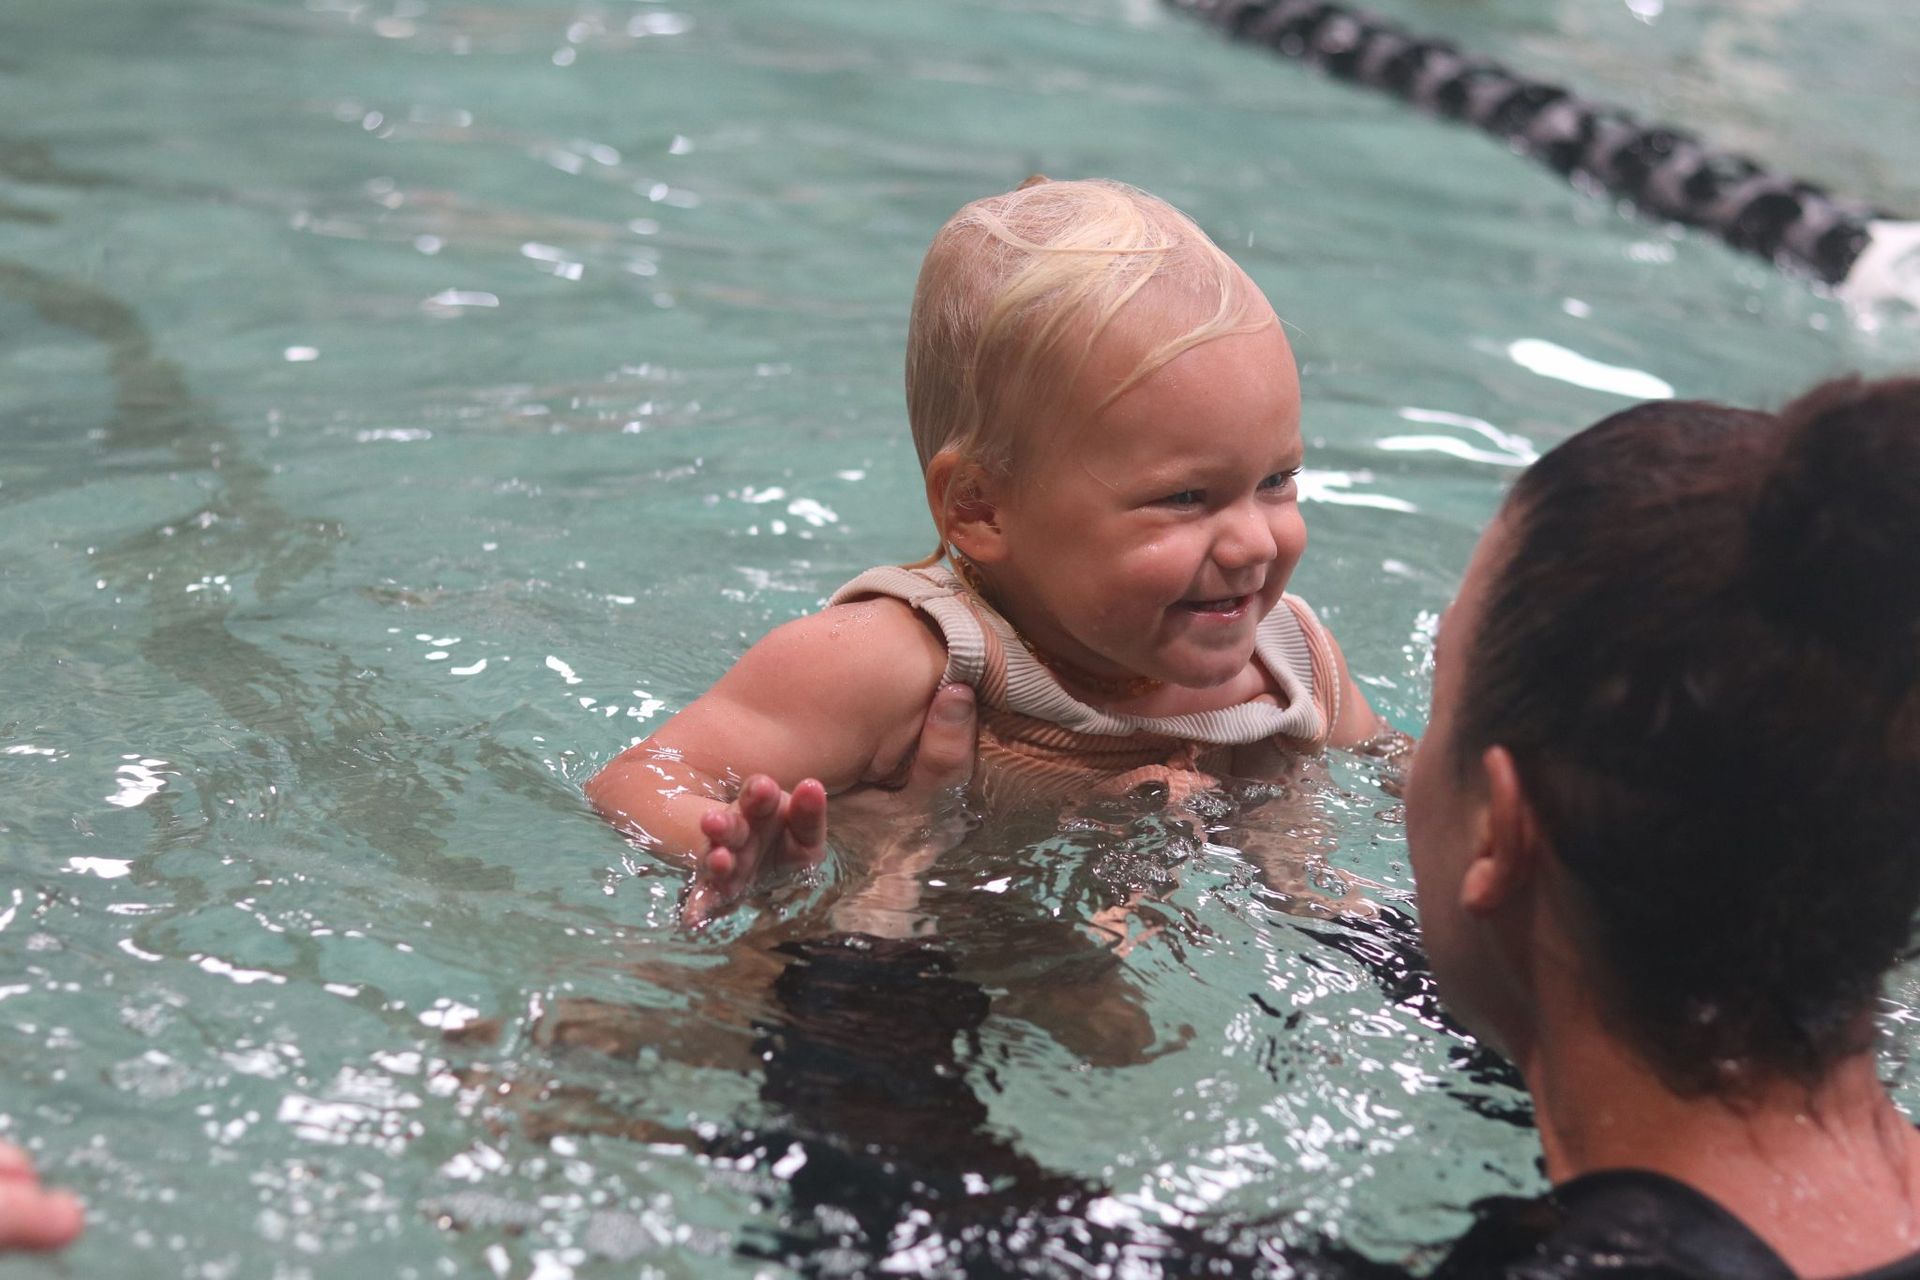 A woman is teaching a baby how to swim in a swimming pool.